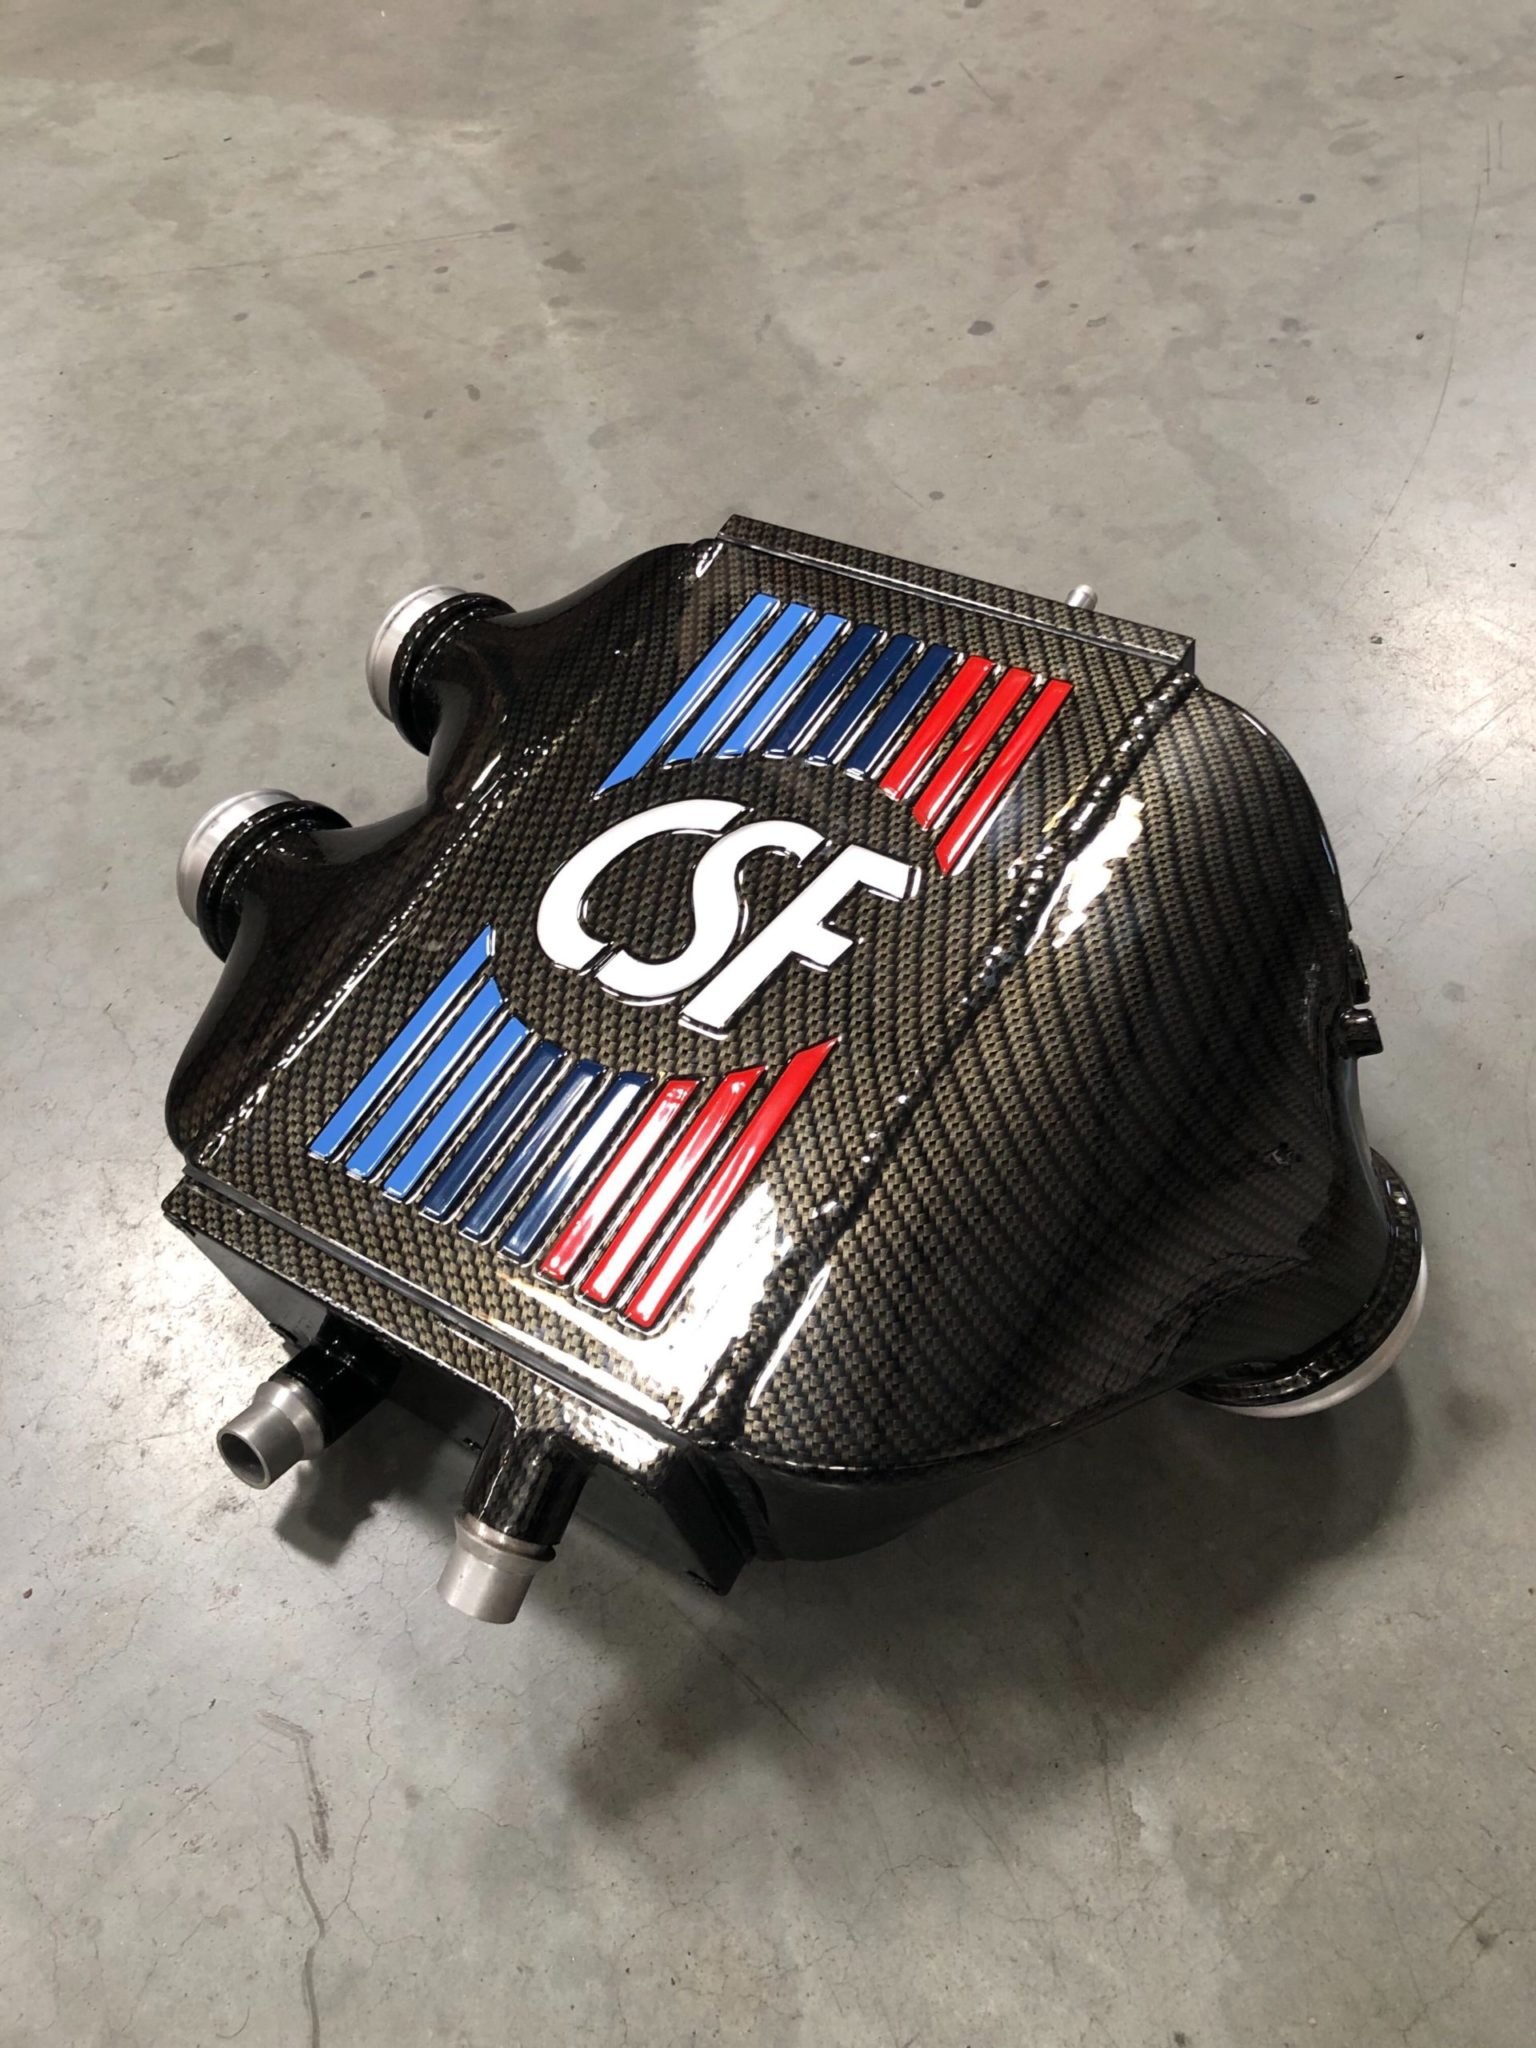 CSF Race BMW F8X M3/M4/M2C Top Mount Charge-Air-Cooler in custom Carbon Fiber w/ BMW M Color Striping and silverstone logo (+$900) - 8082